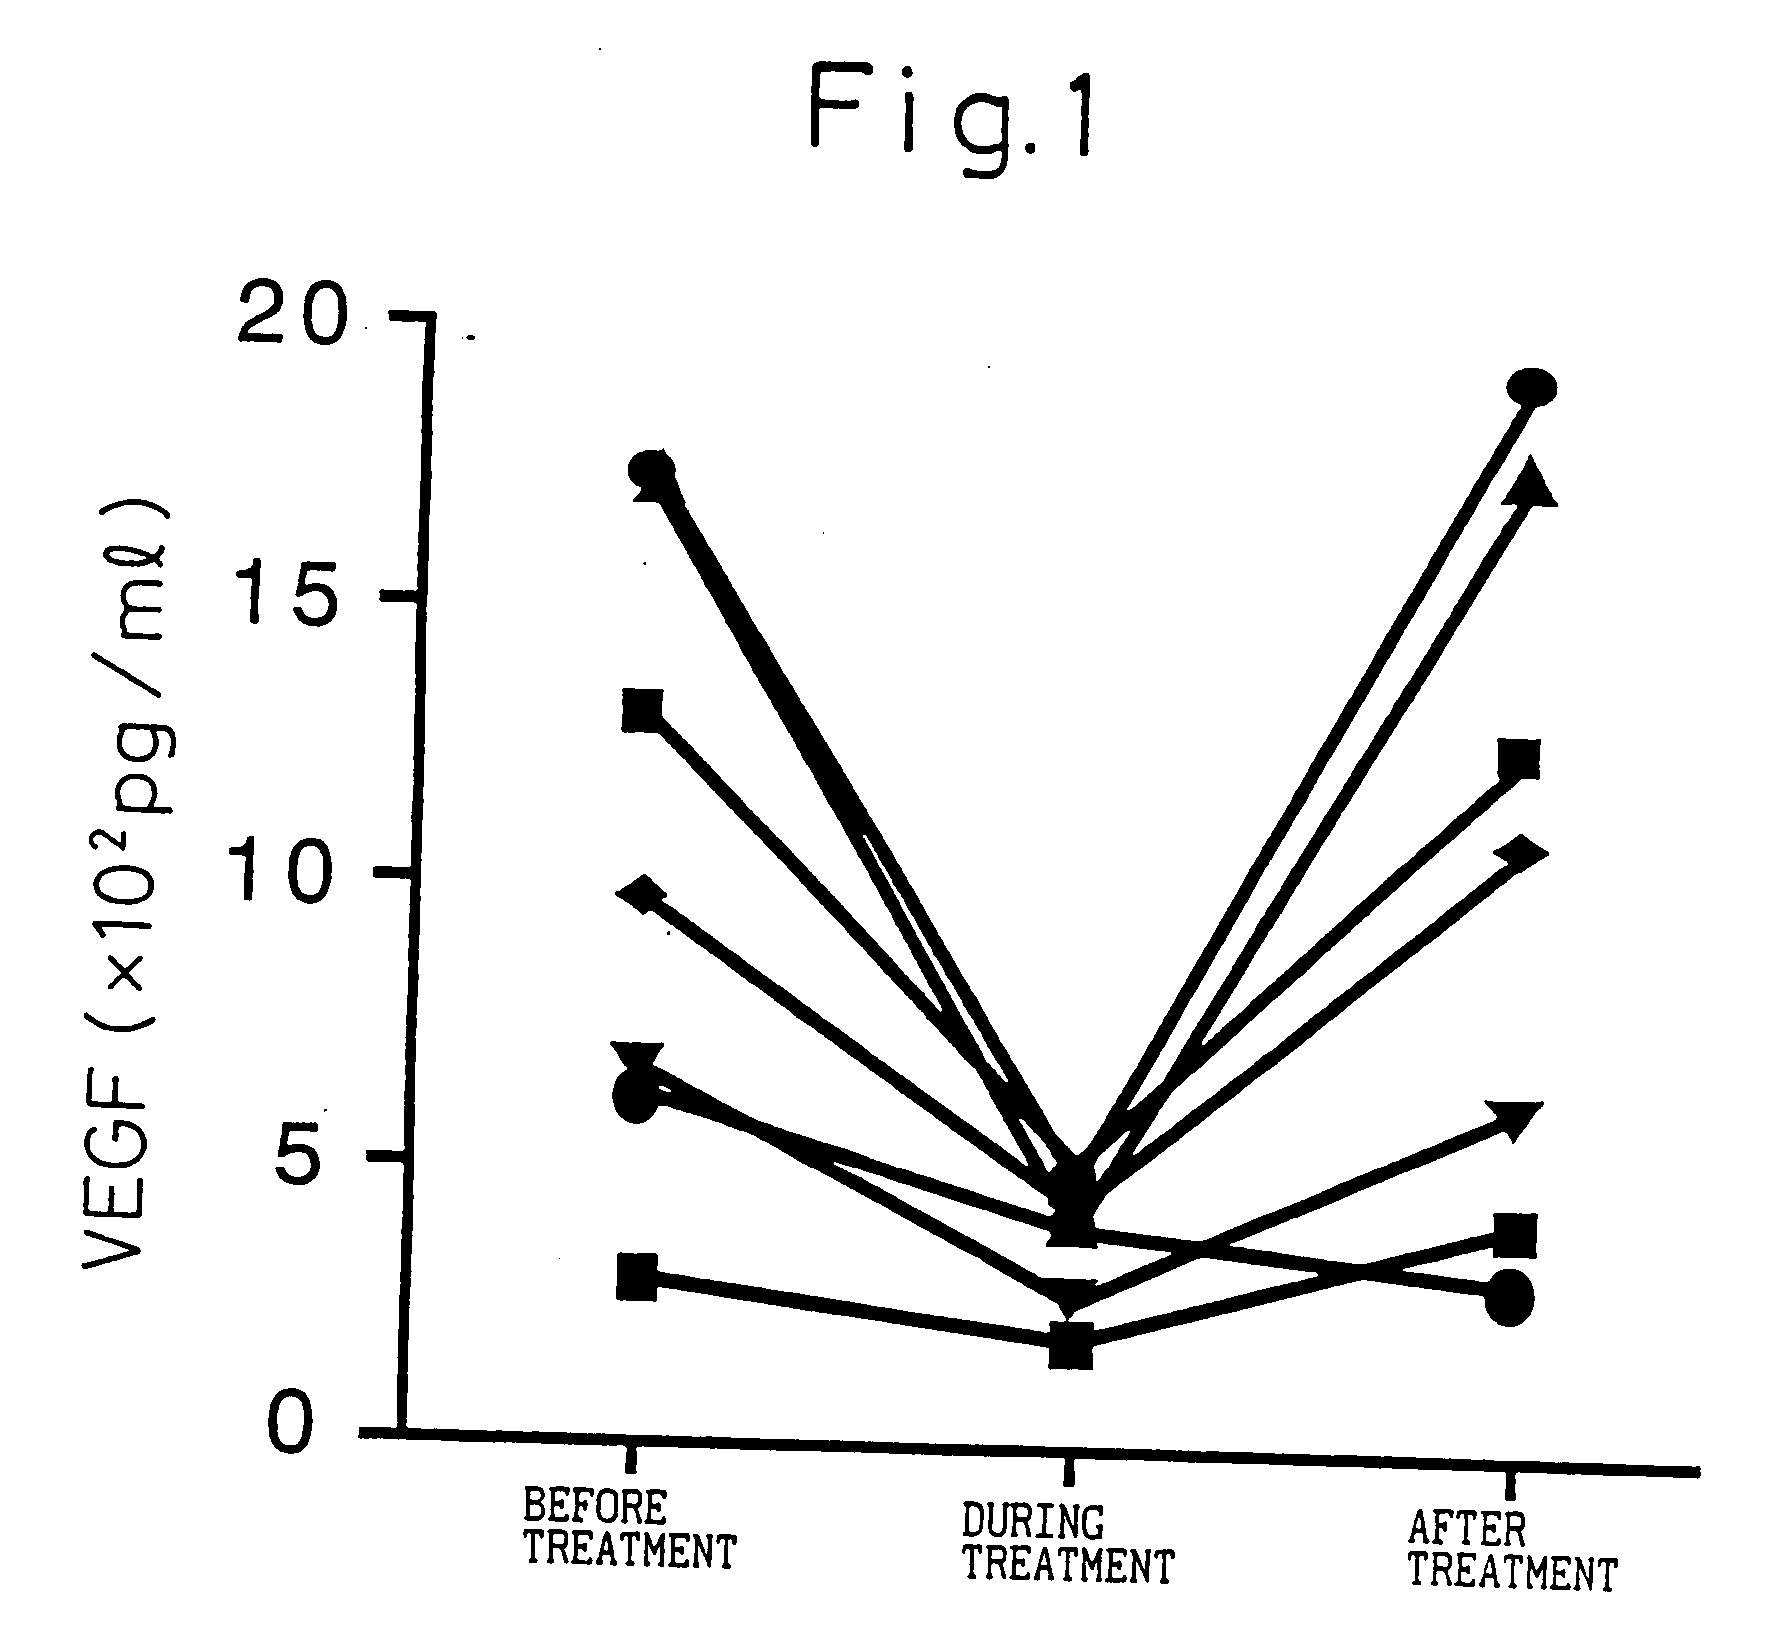 Blood VEGF level-lowering agent containing IL-6 antagonist as the active ingredient